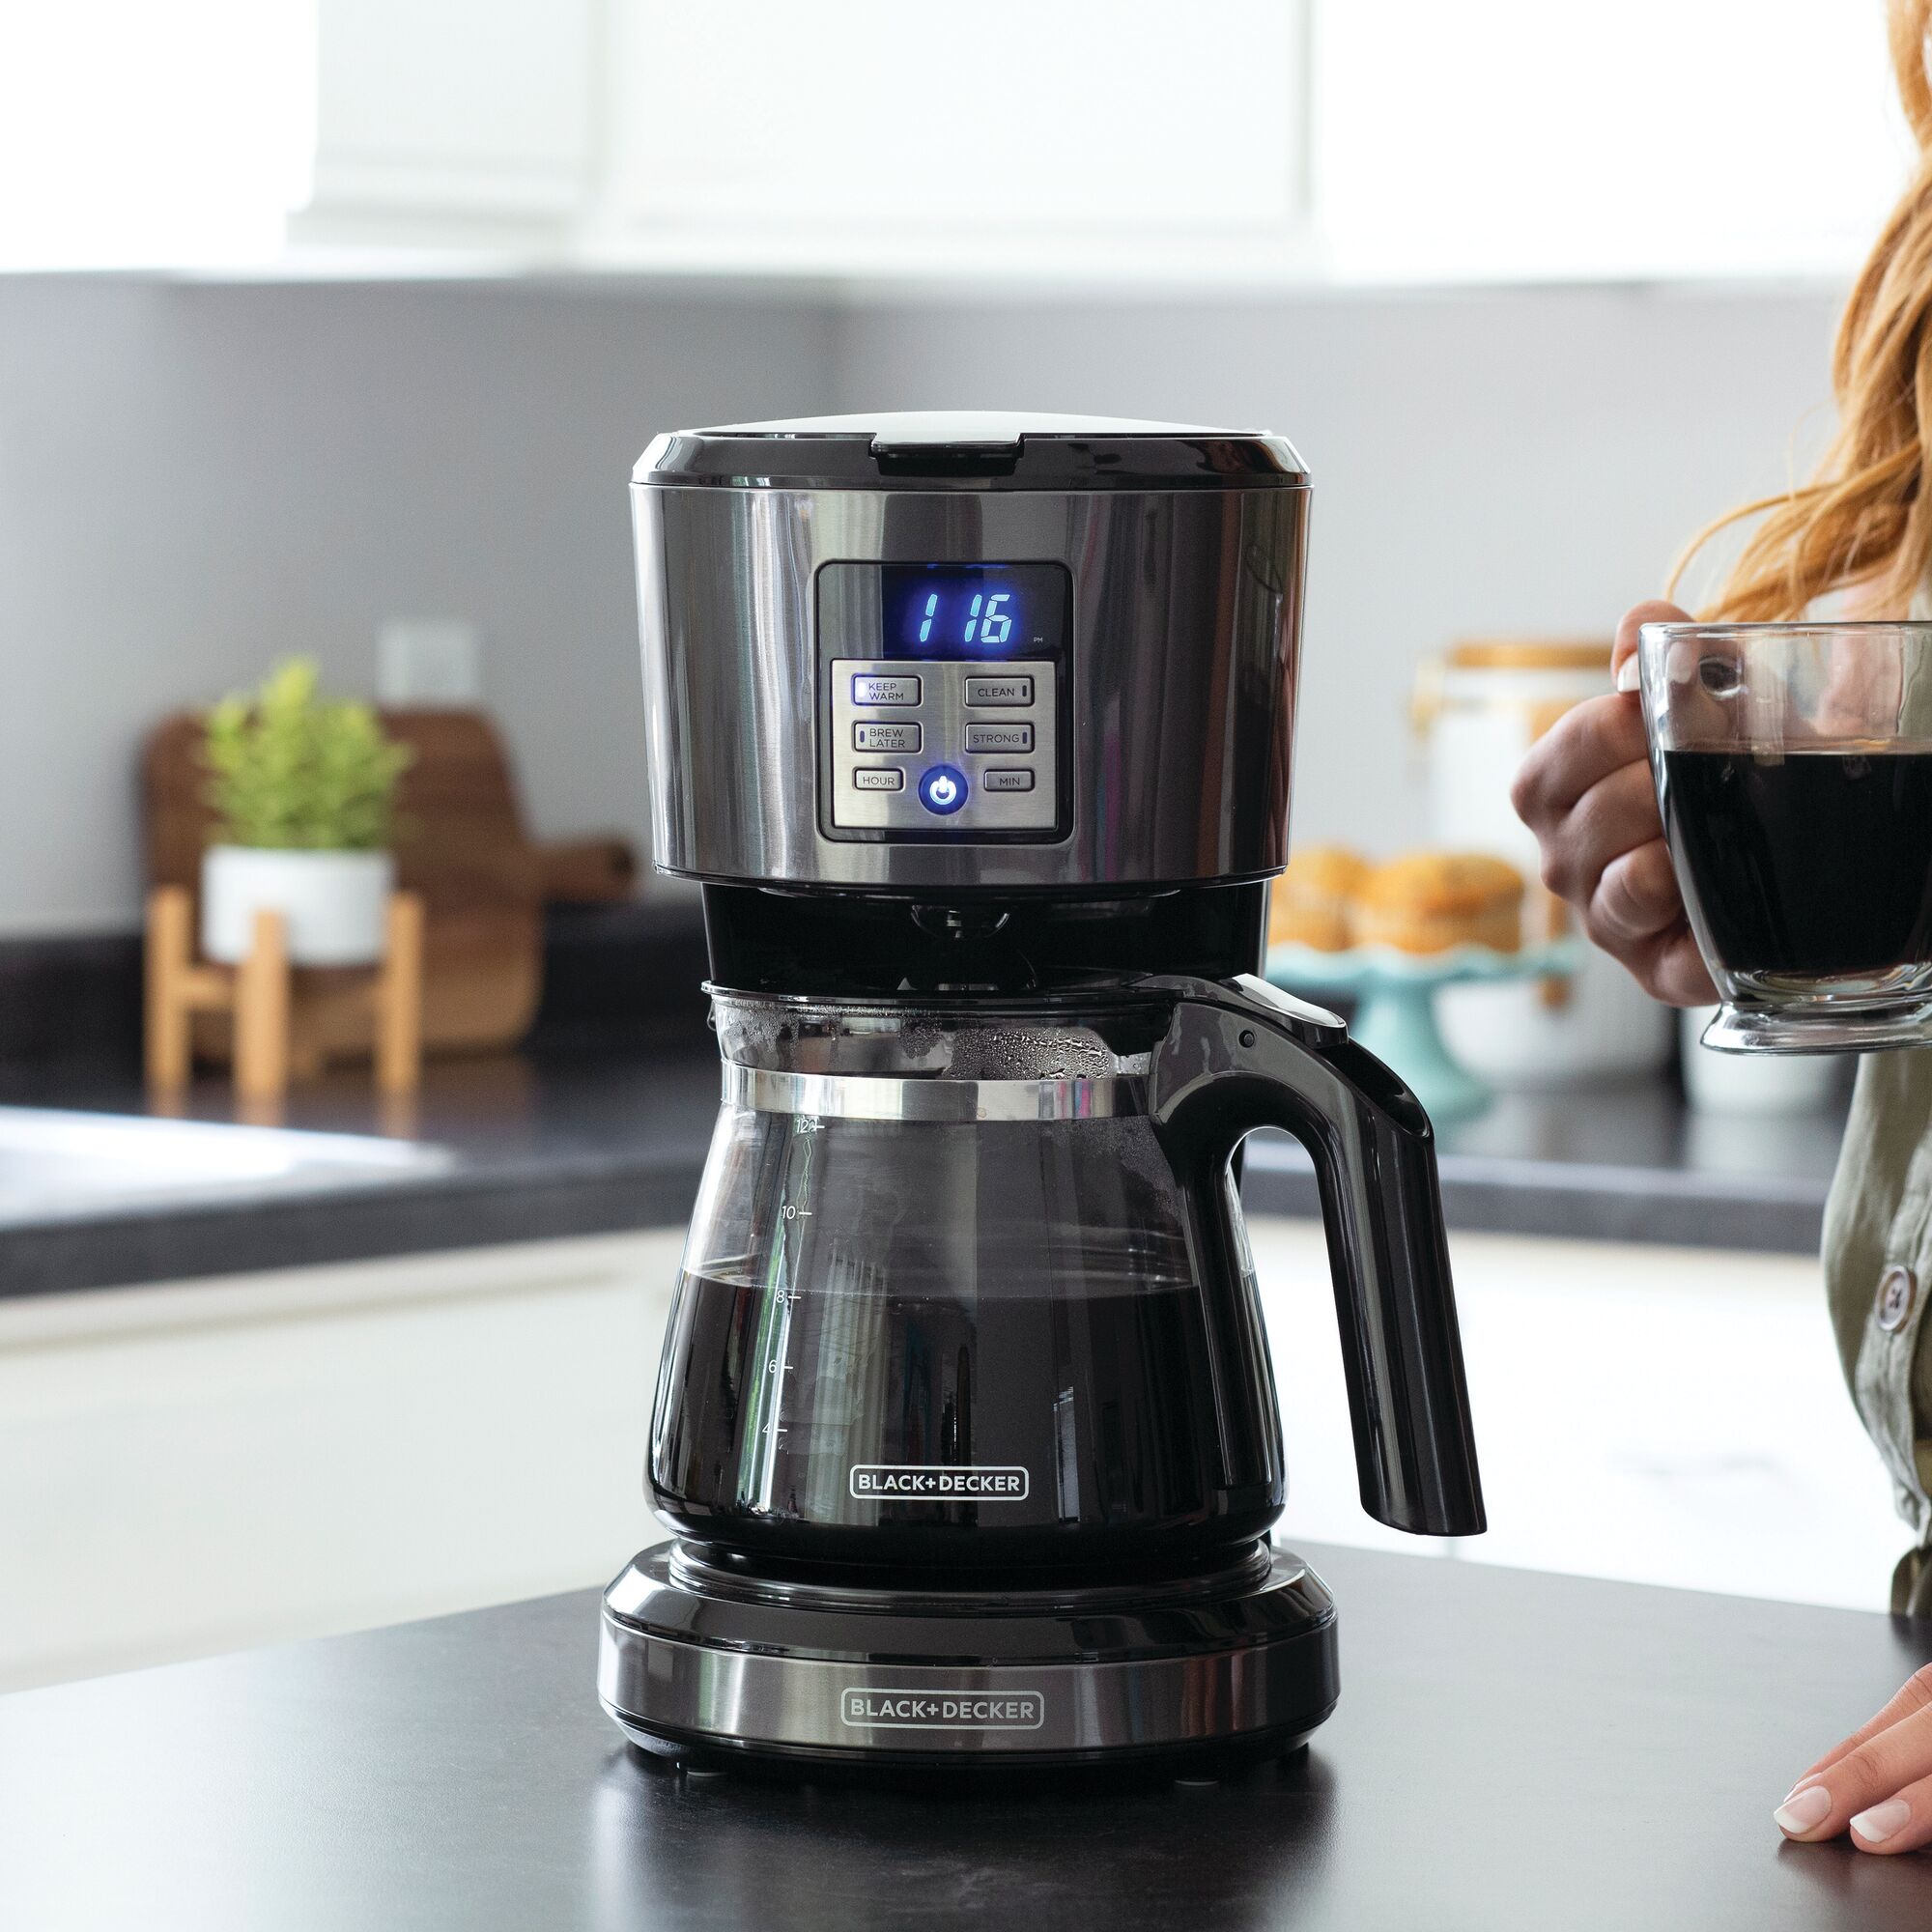 12 cup coffeemaker, programmable, exclusive VORTEX technology being used to brew coffee.